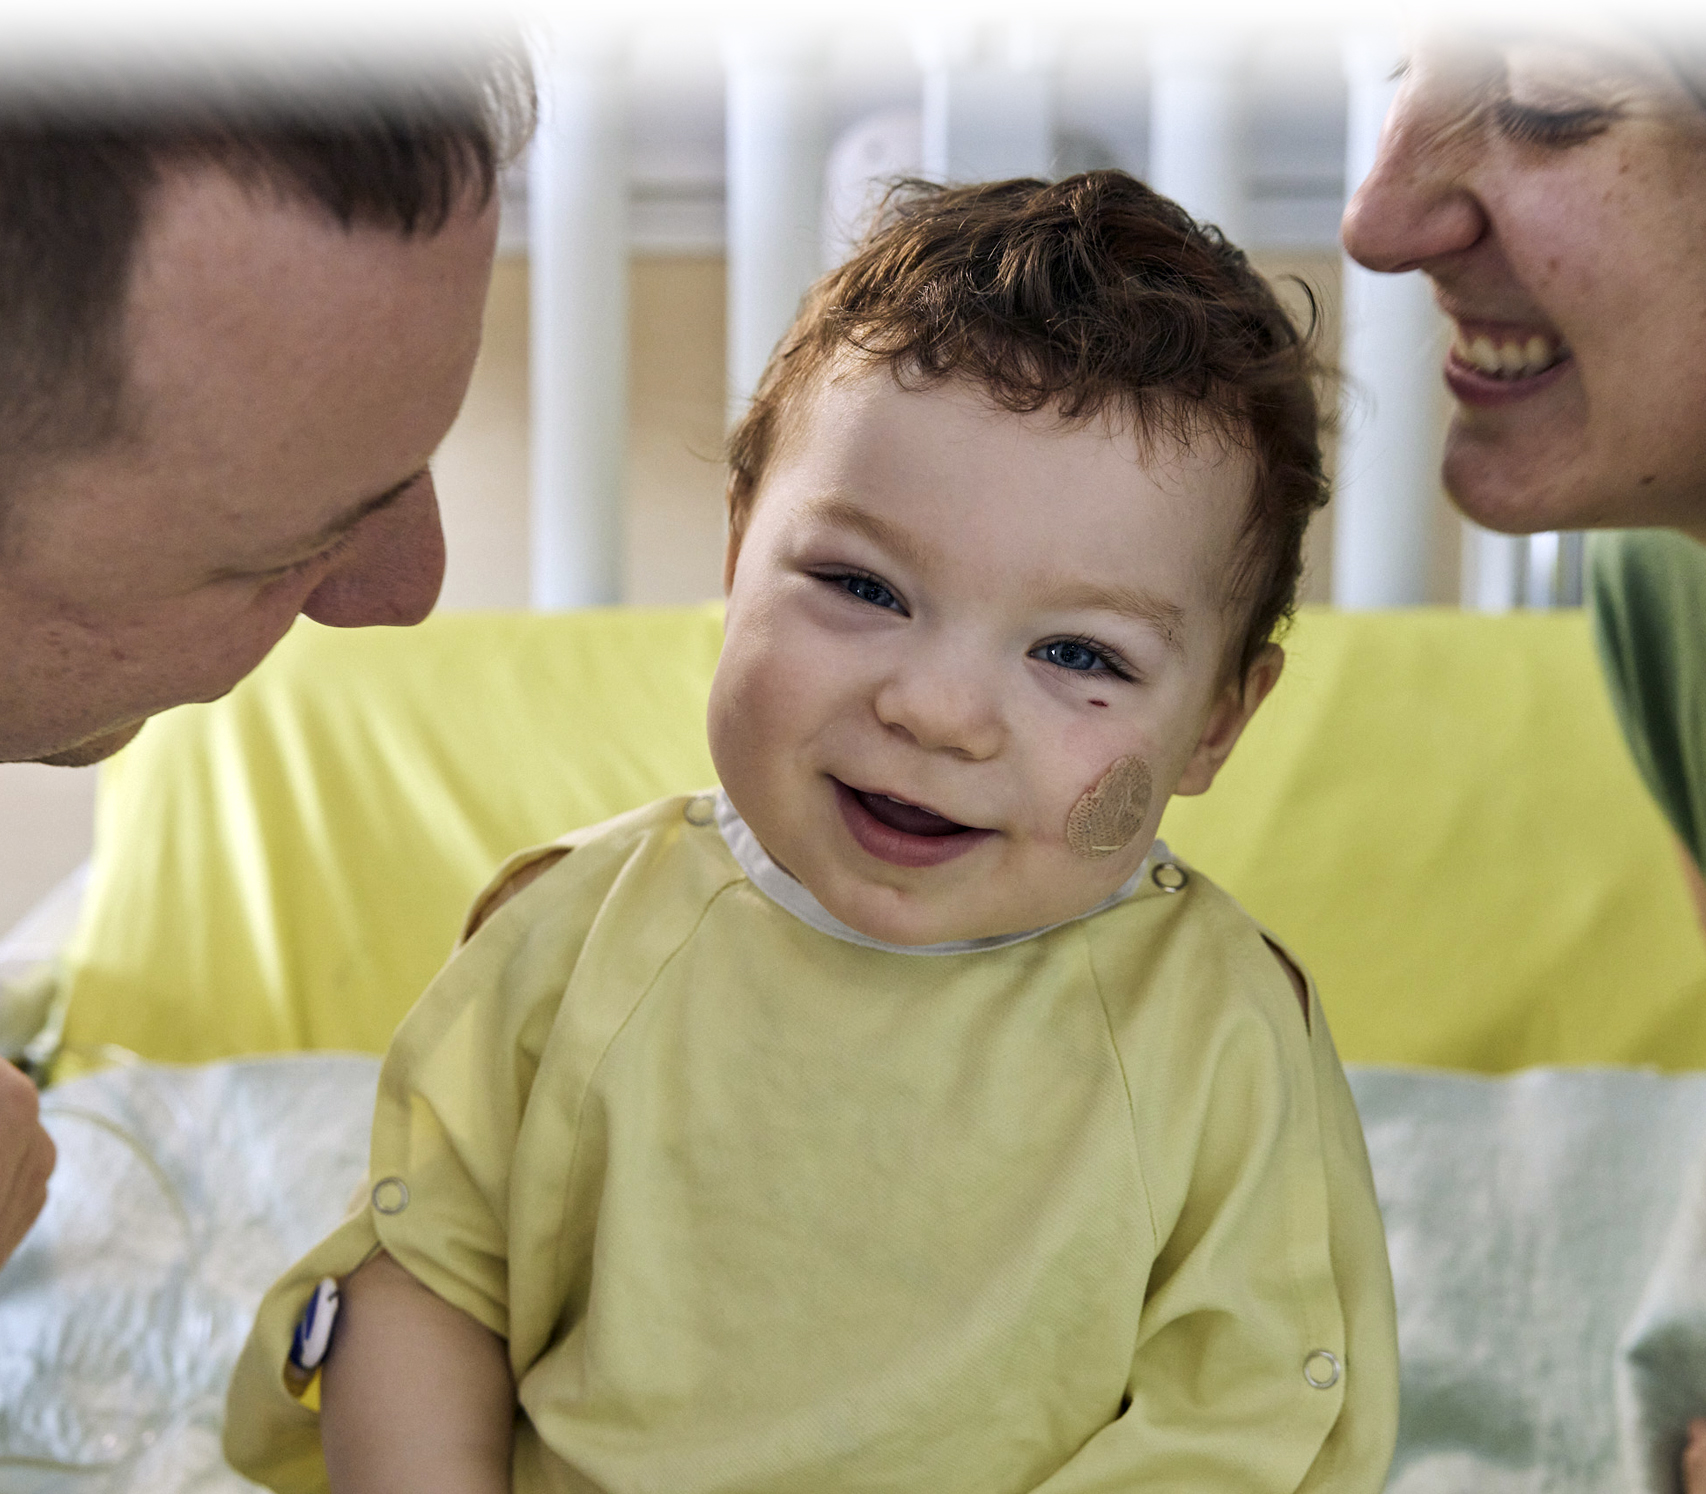 Julien, 16 months, in a yellow hospital gown, smiling tenderly as his adoring parents gaze on.